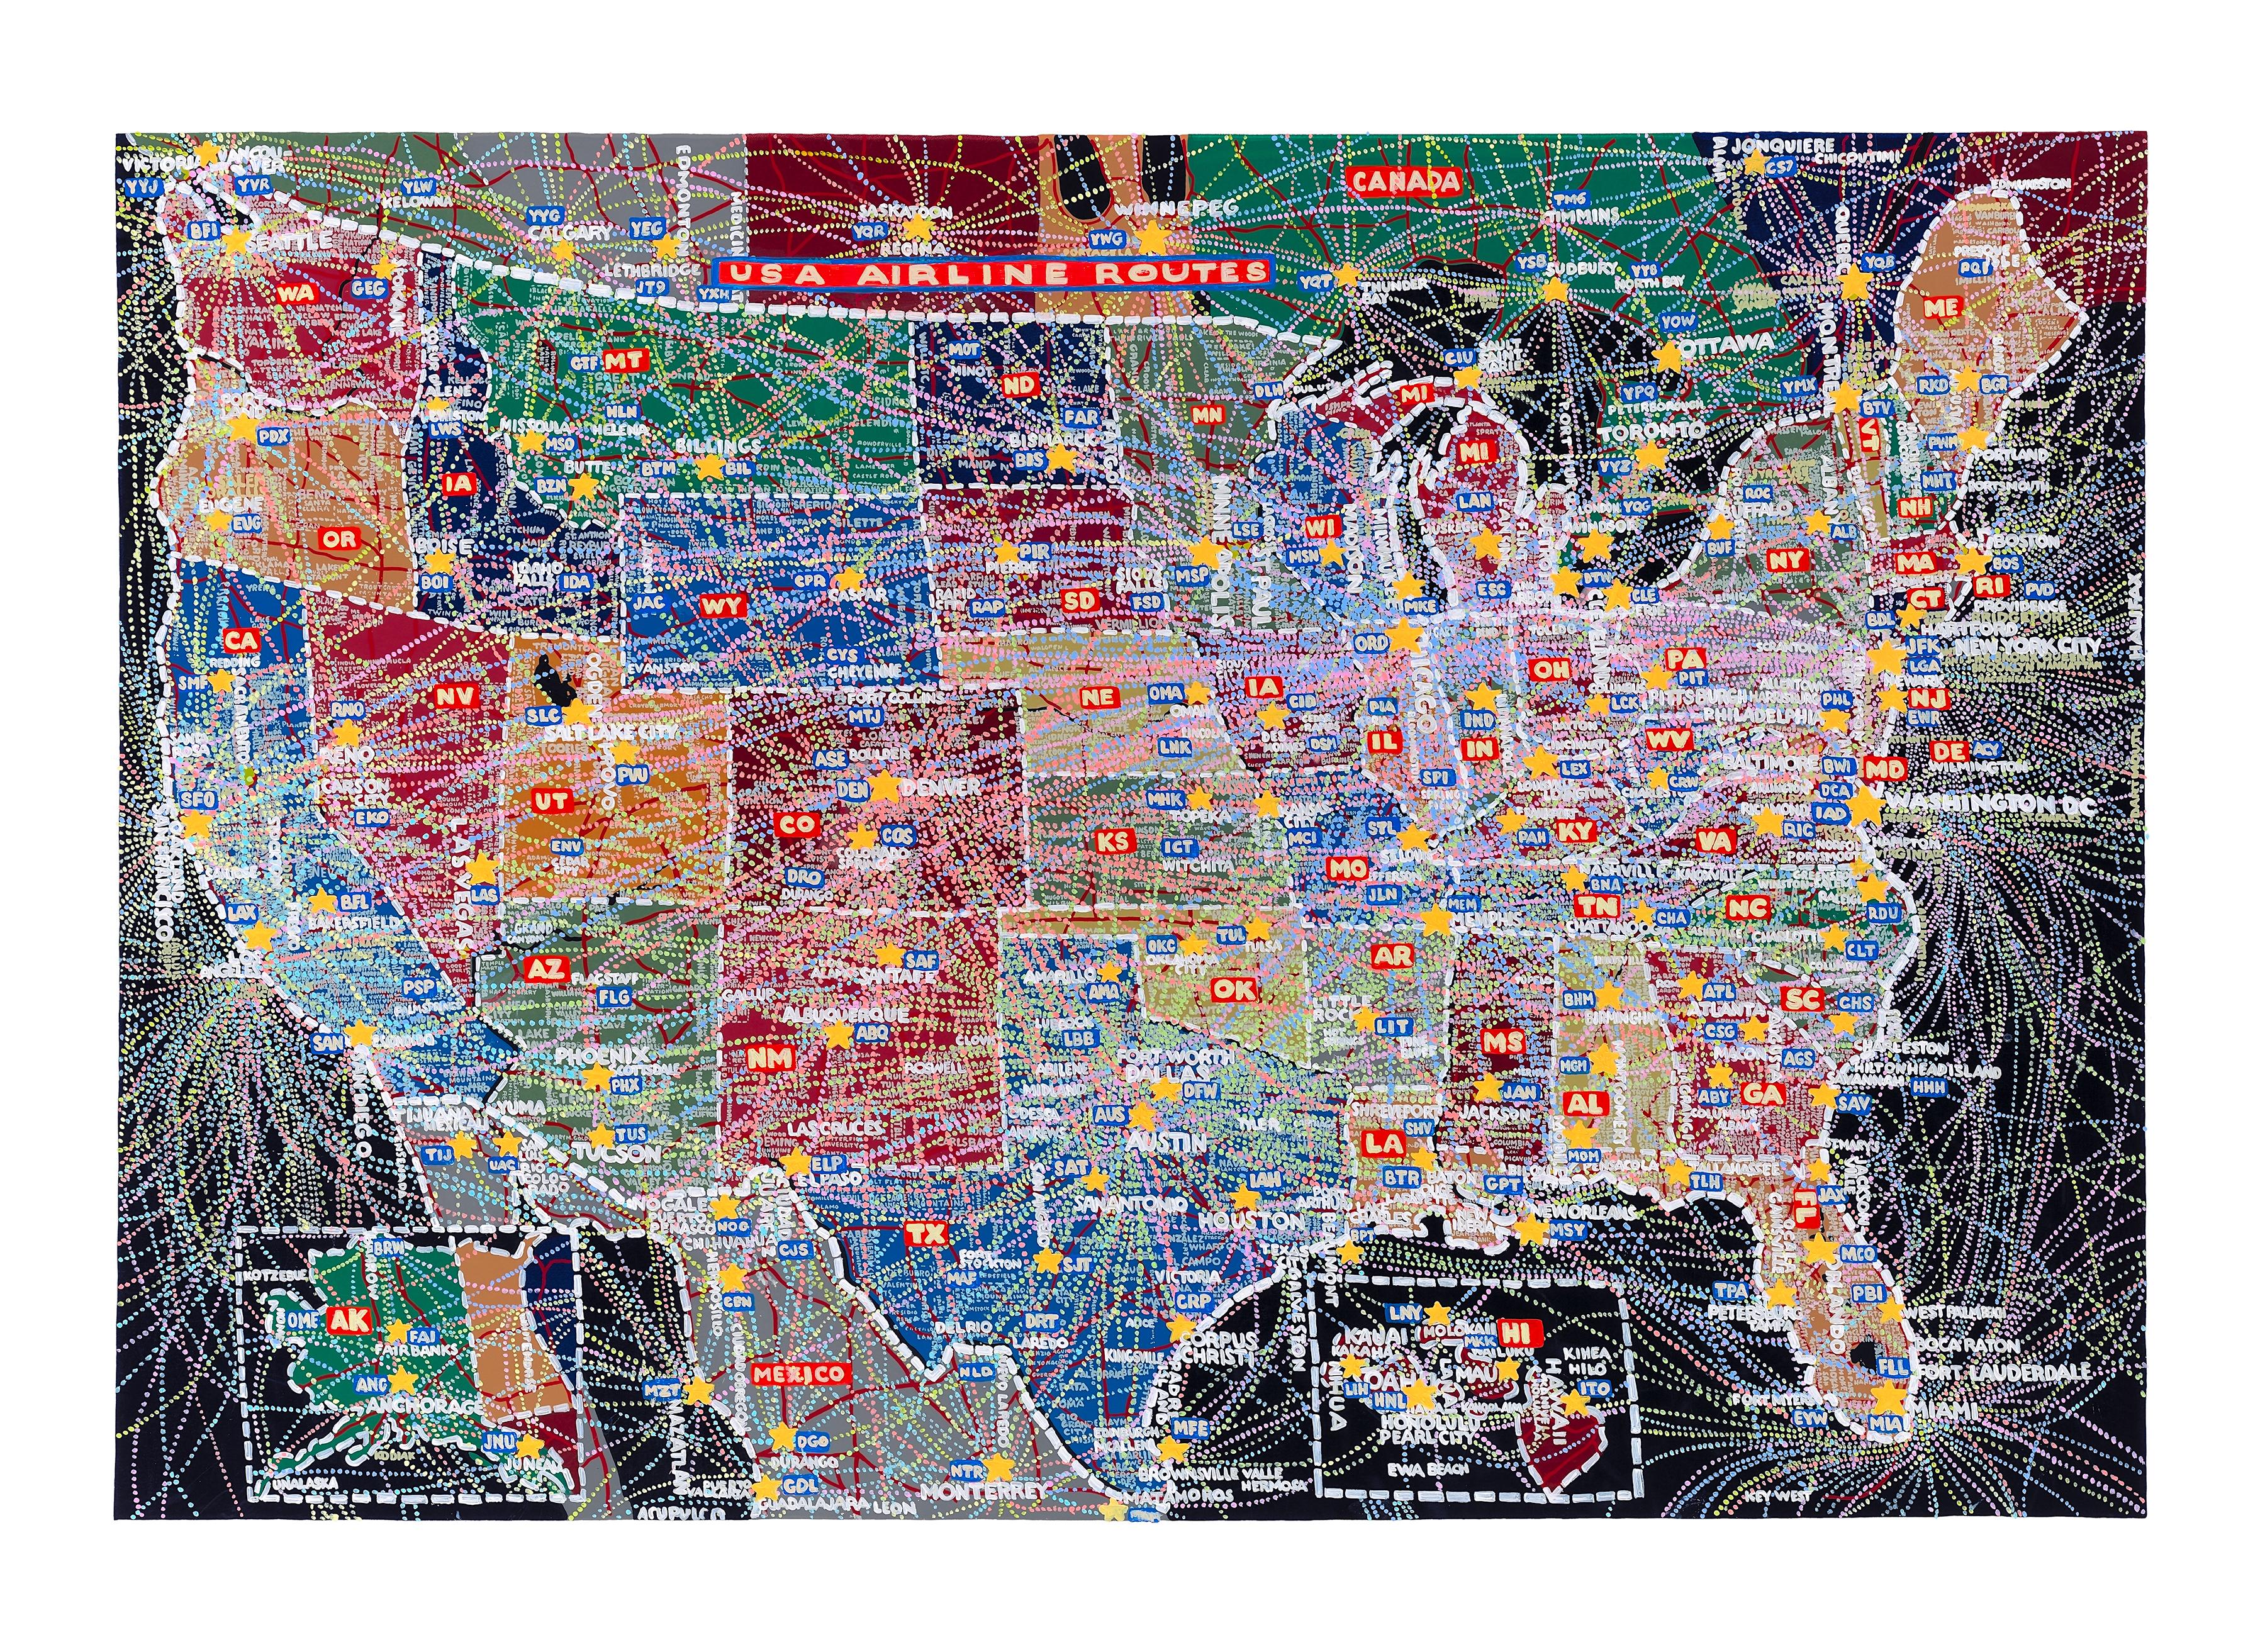 Paula Scher Abstract Print - U.S.A. Airline Routes